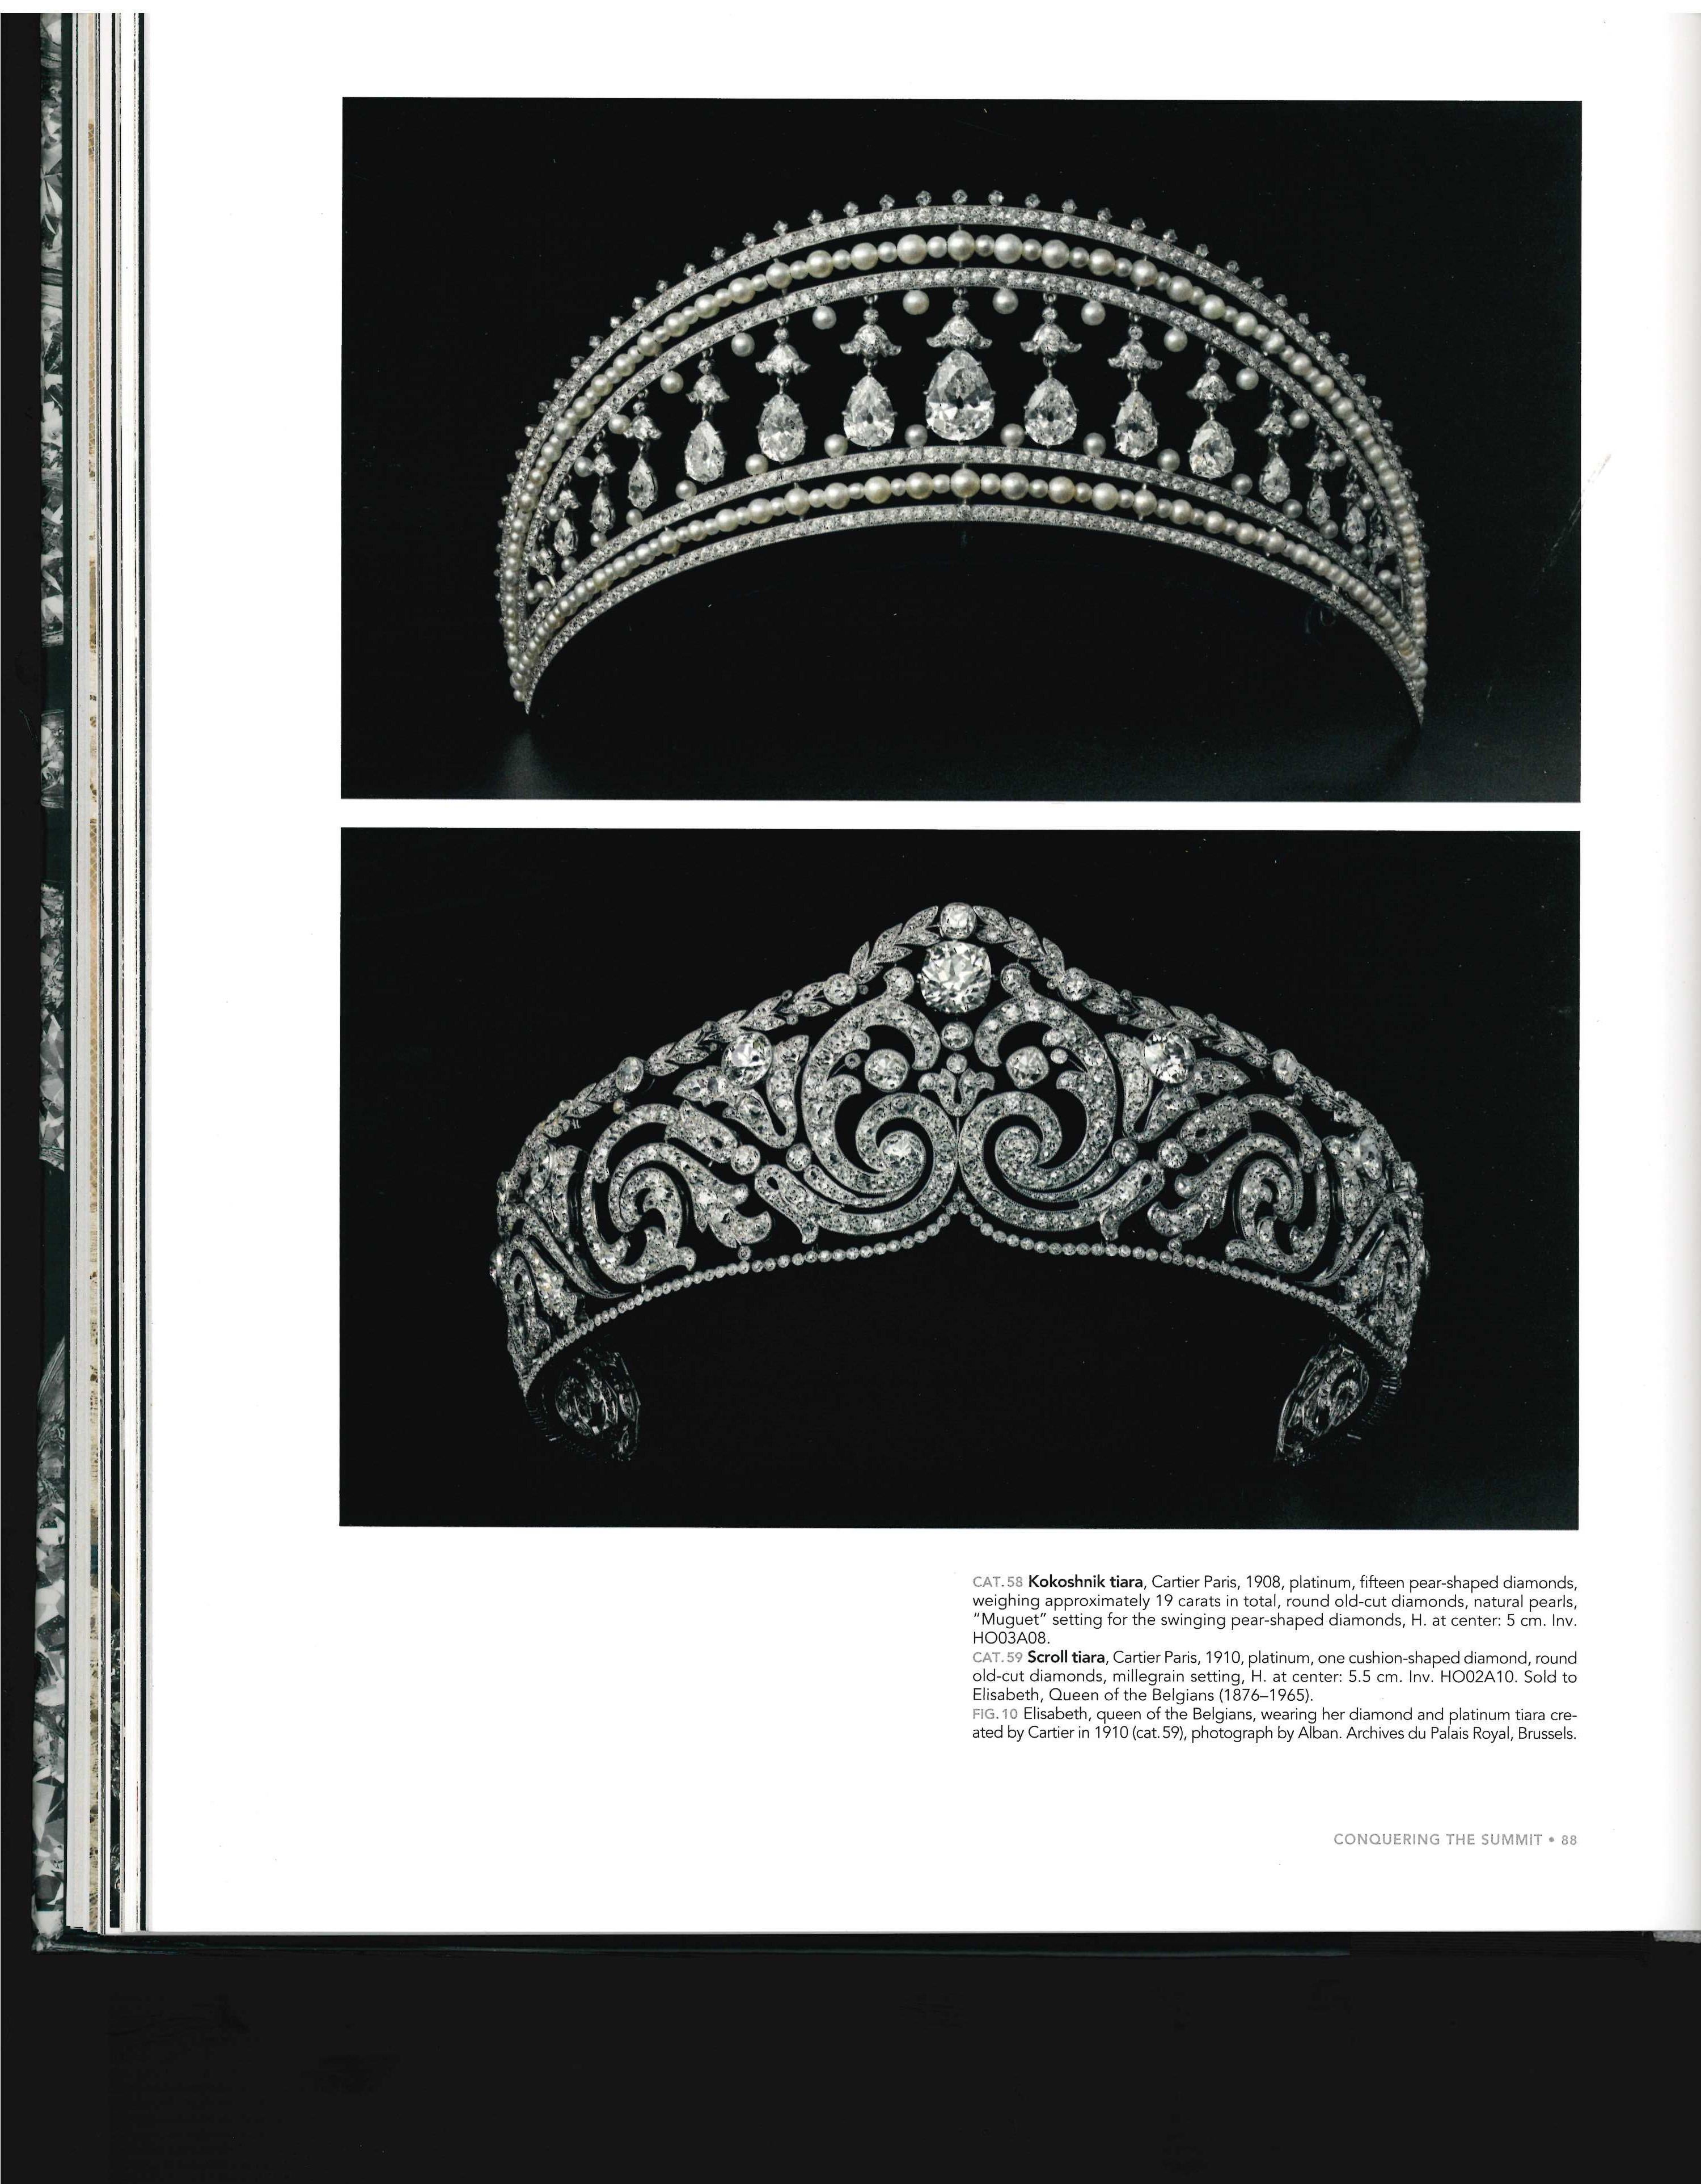 This beautiful book was published to accompany an exhibition held in the Grand Palais in 2013. A very large number of the pieces on display and photographed in the book were loaned by the Cartier Collection and are not generally available to view